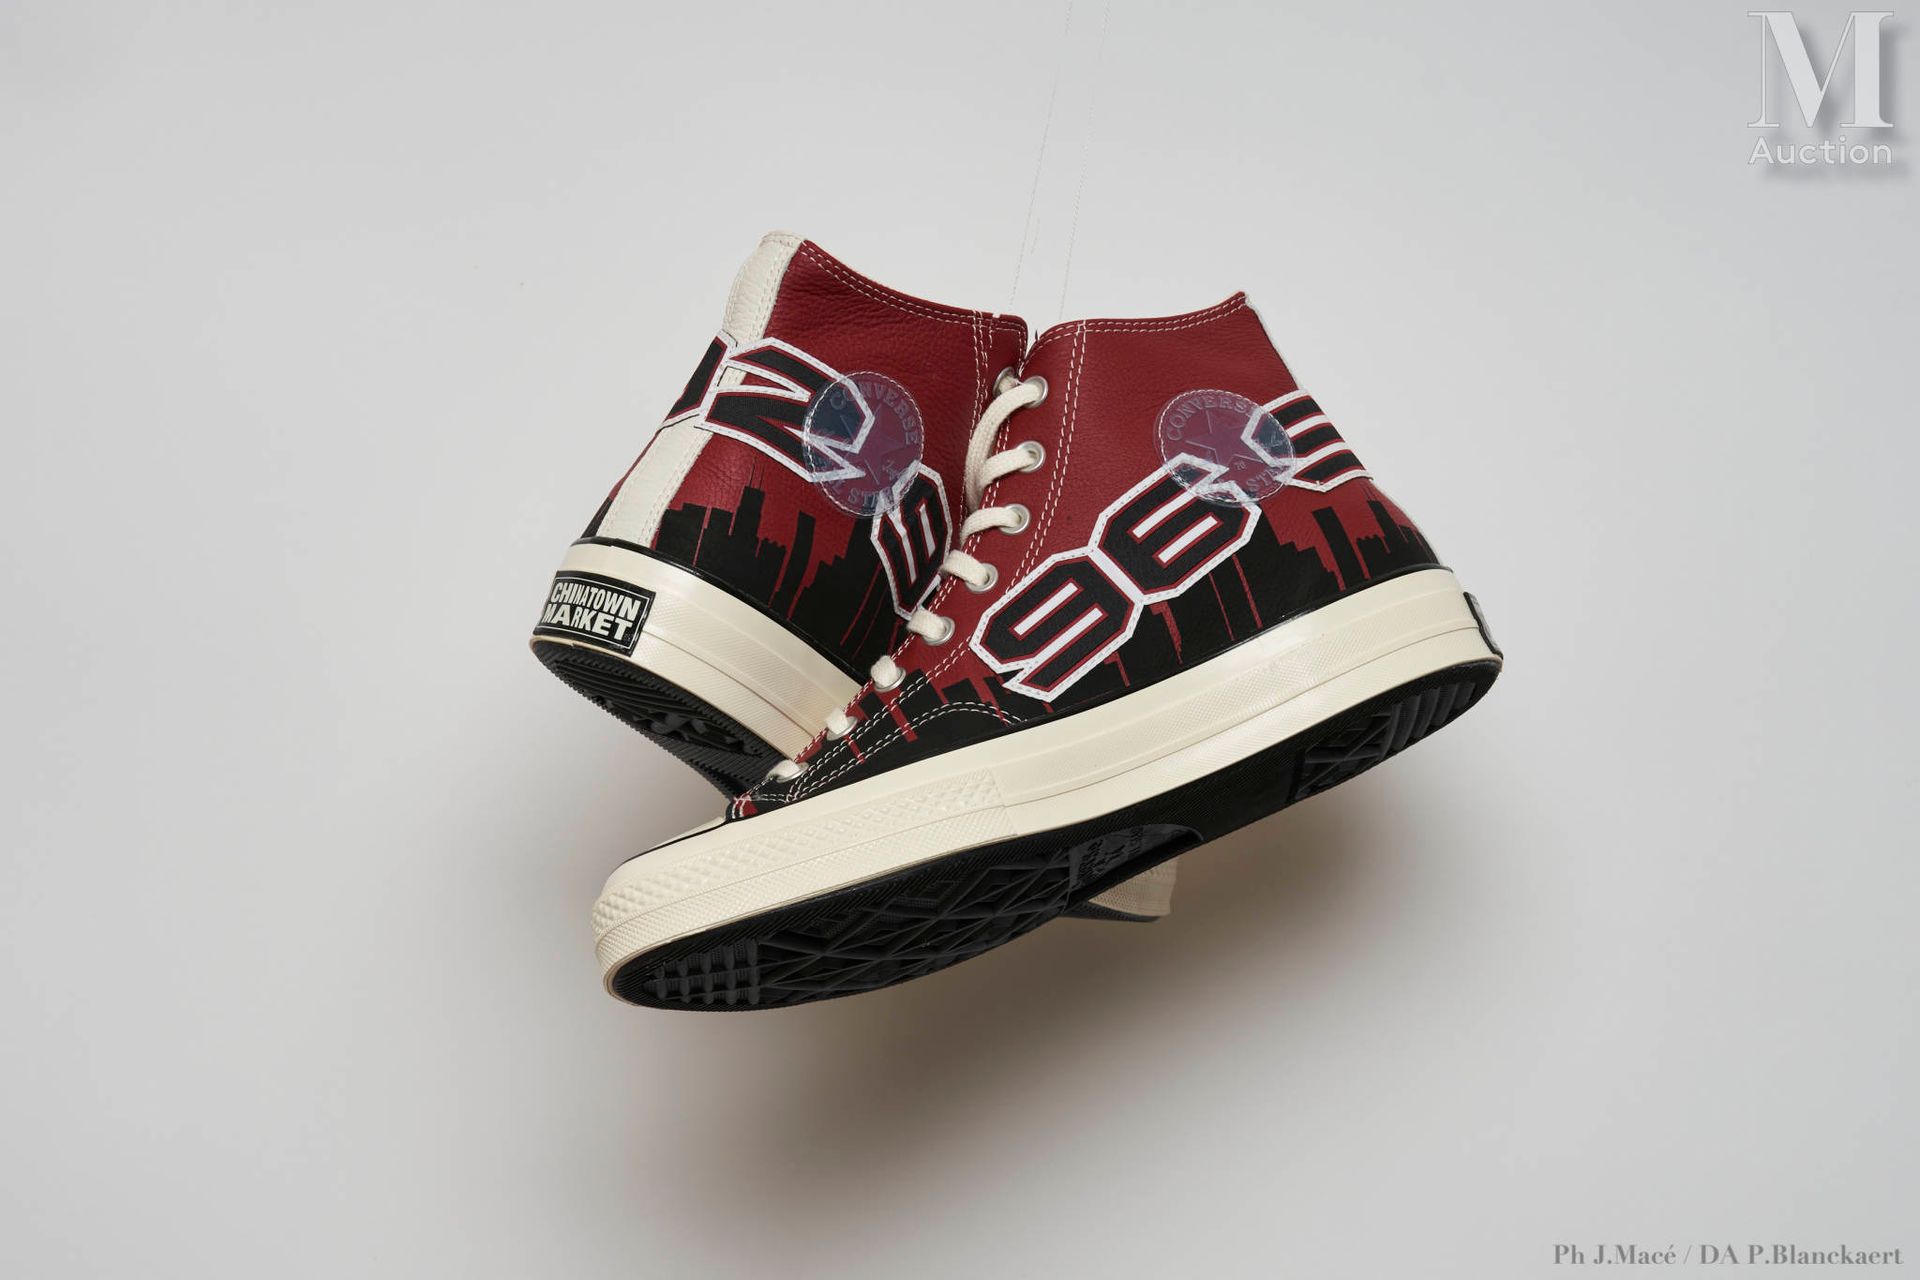 CONVERSE PAAR "CHUCK TAYLOR CHINATOWN MARKET NBA CHICAGO BULLS" SNEAKERS
aus bed&hellip;